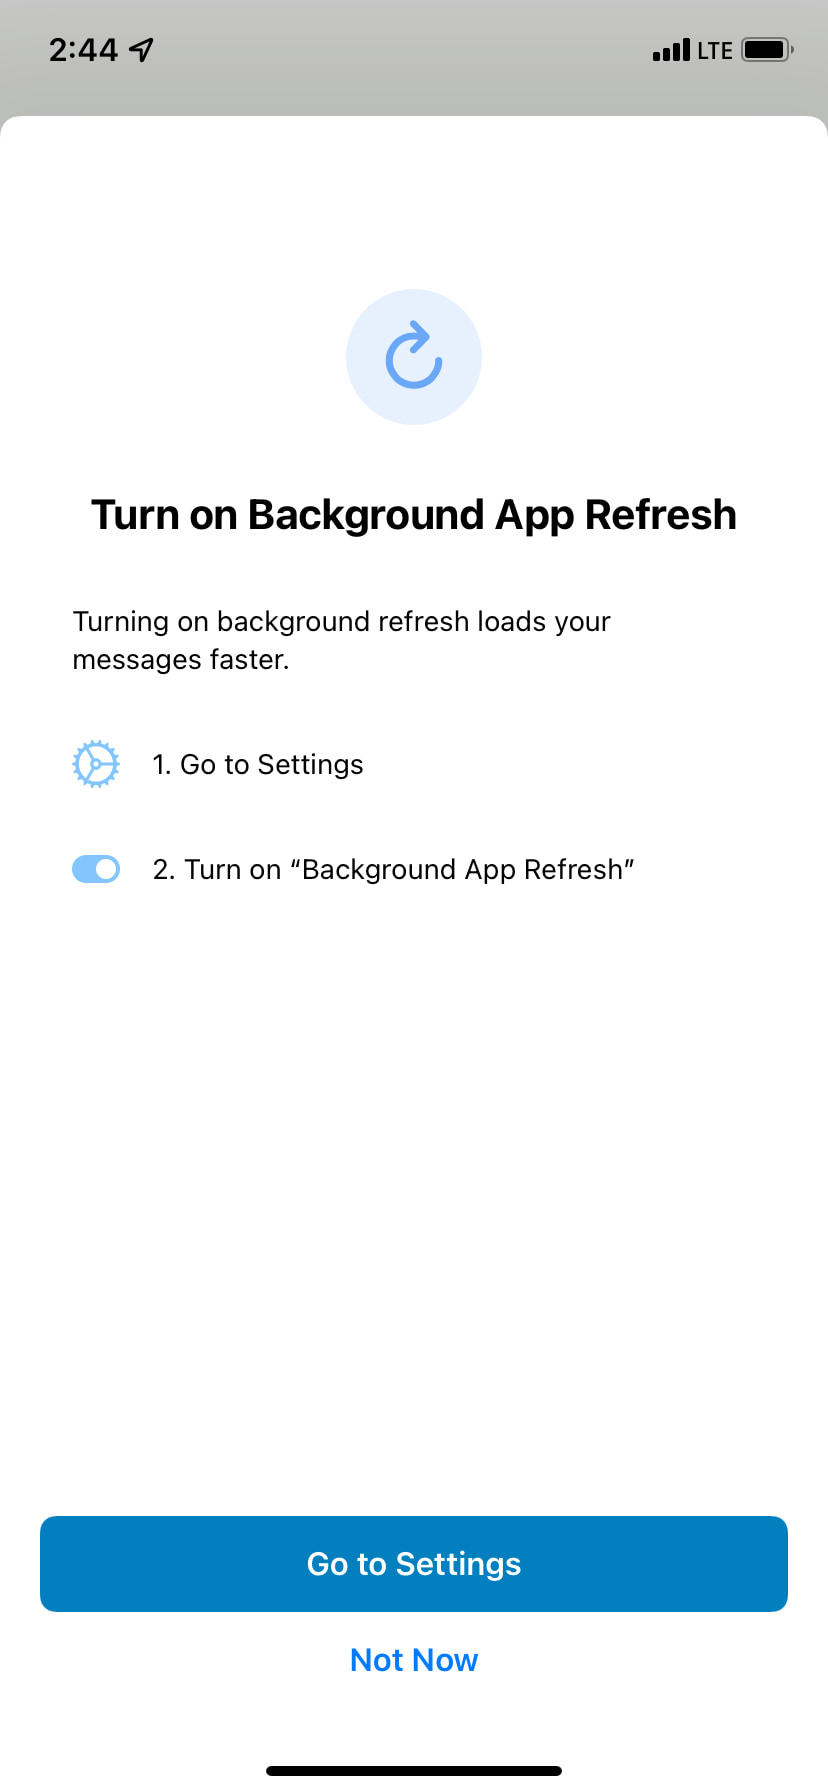 Why and how to turn off Background App Refresh on iPhone & iPad